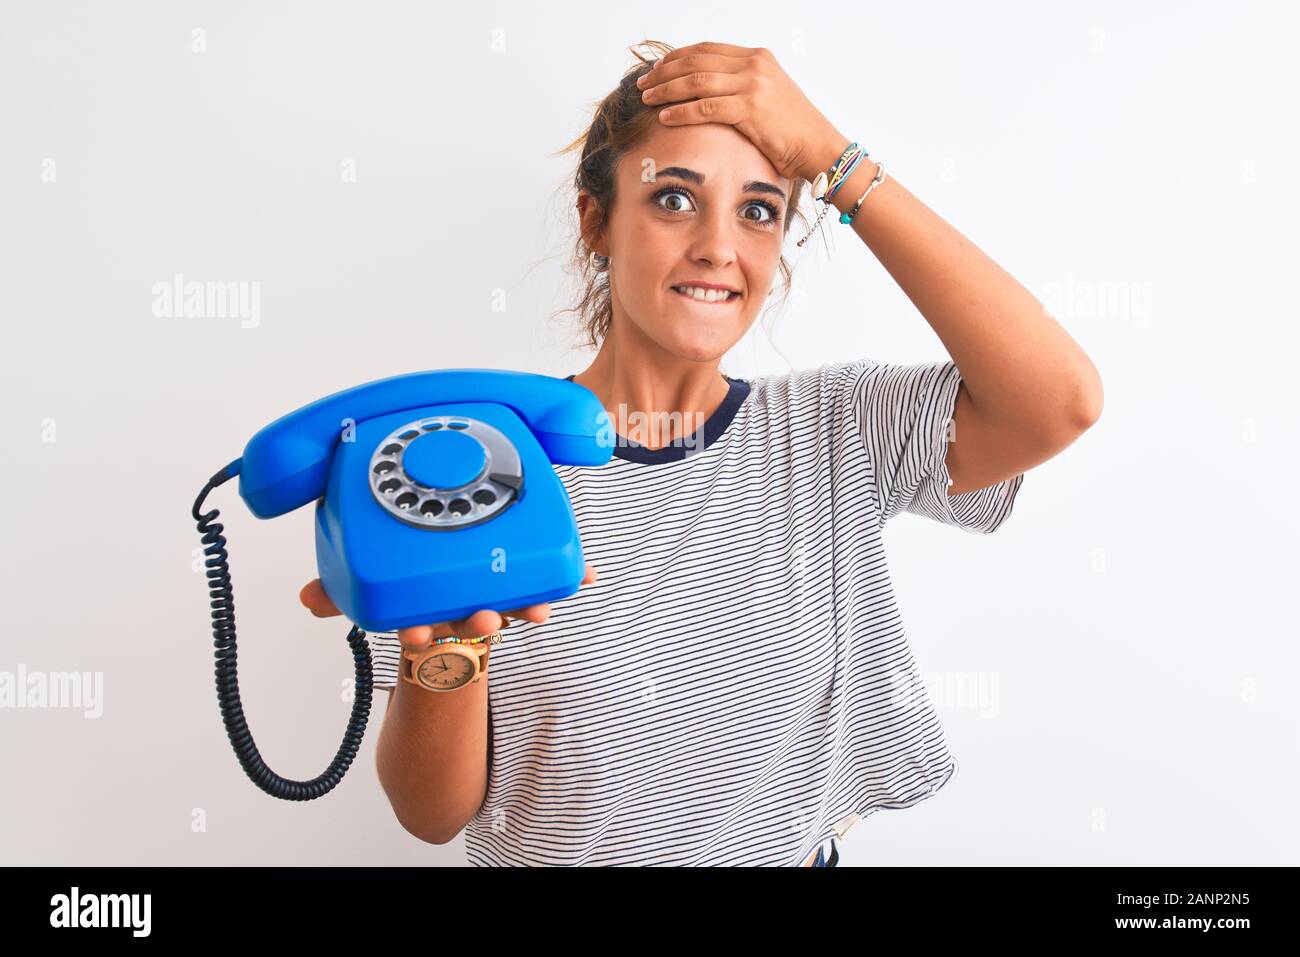 Young redhead woman holding classic retro telephone over isolated background stressed with hand on head, shocked with shame and surprise face, angry a Stock Photo